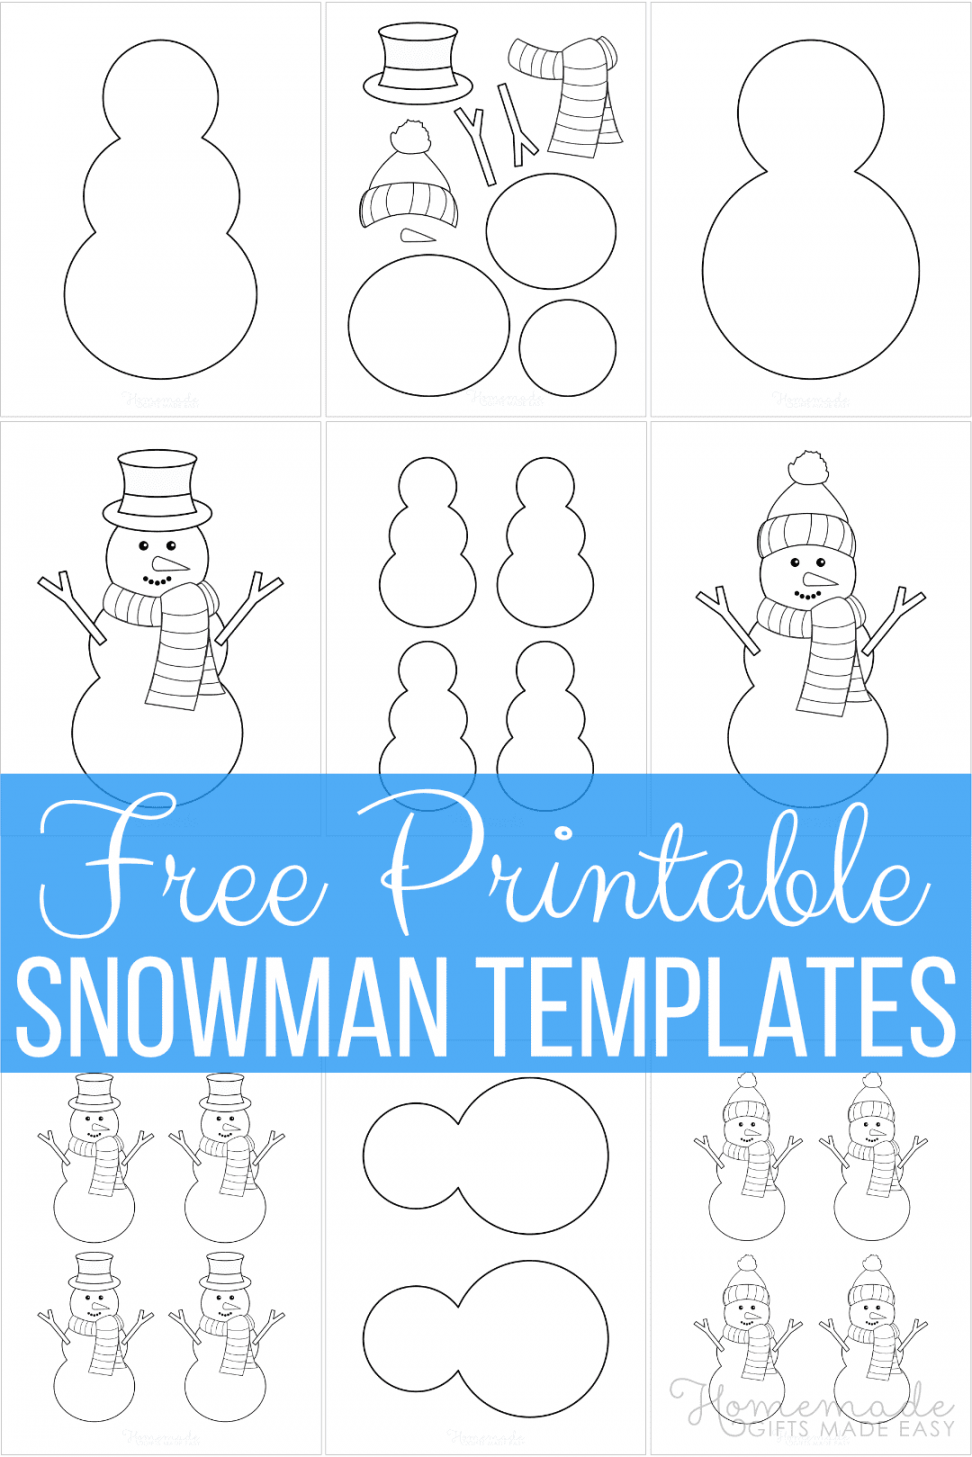 Free Printable Snowman Templates for Crafts - FREE Printables - Free Printable Snowman Template